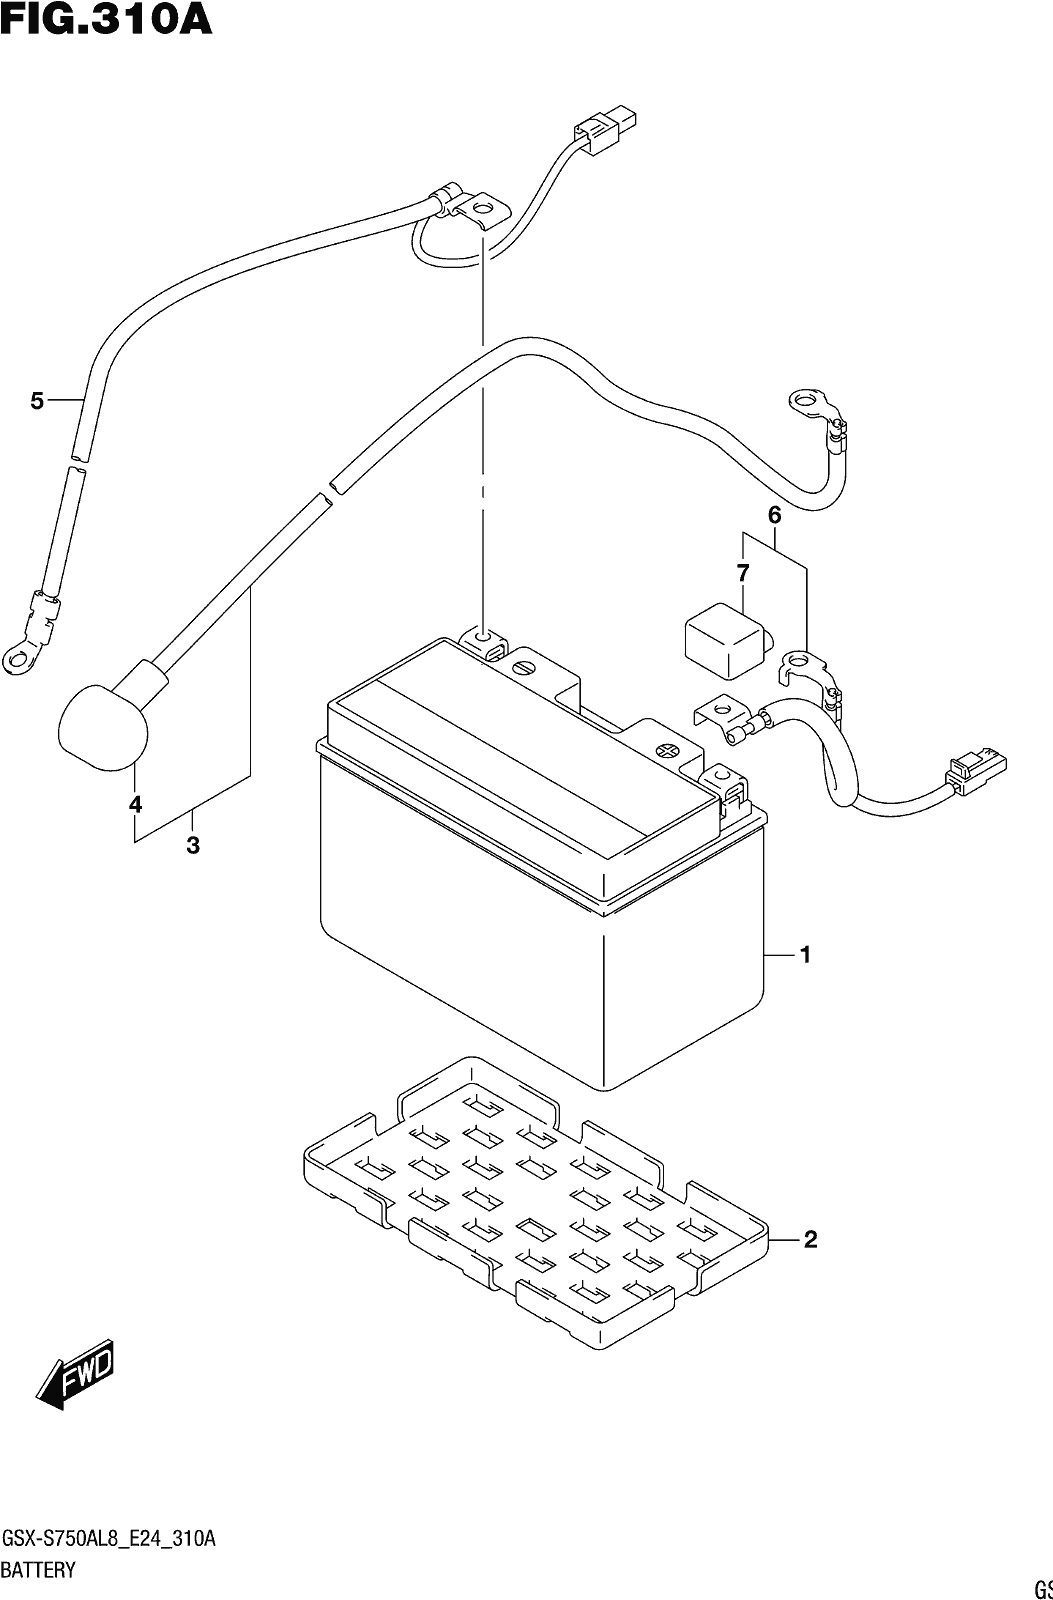 Fig.310a Battery